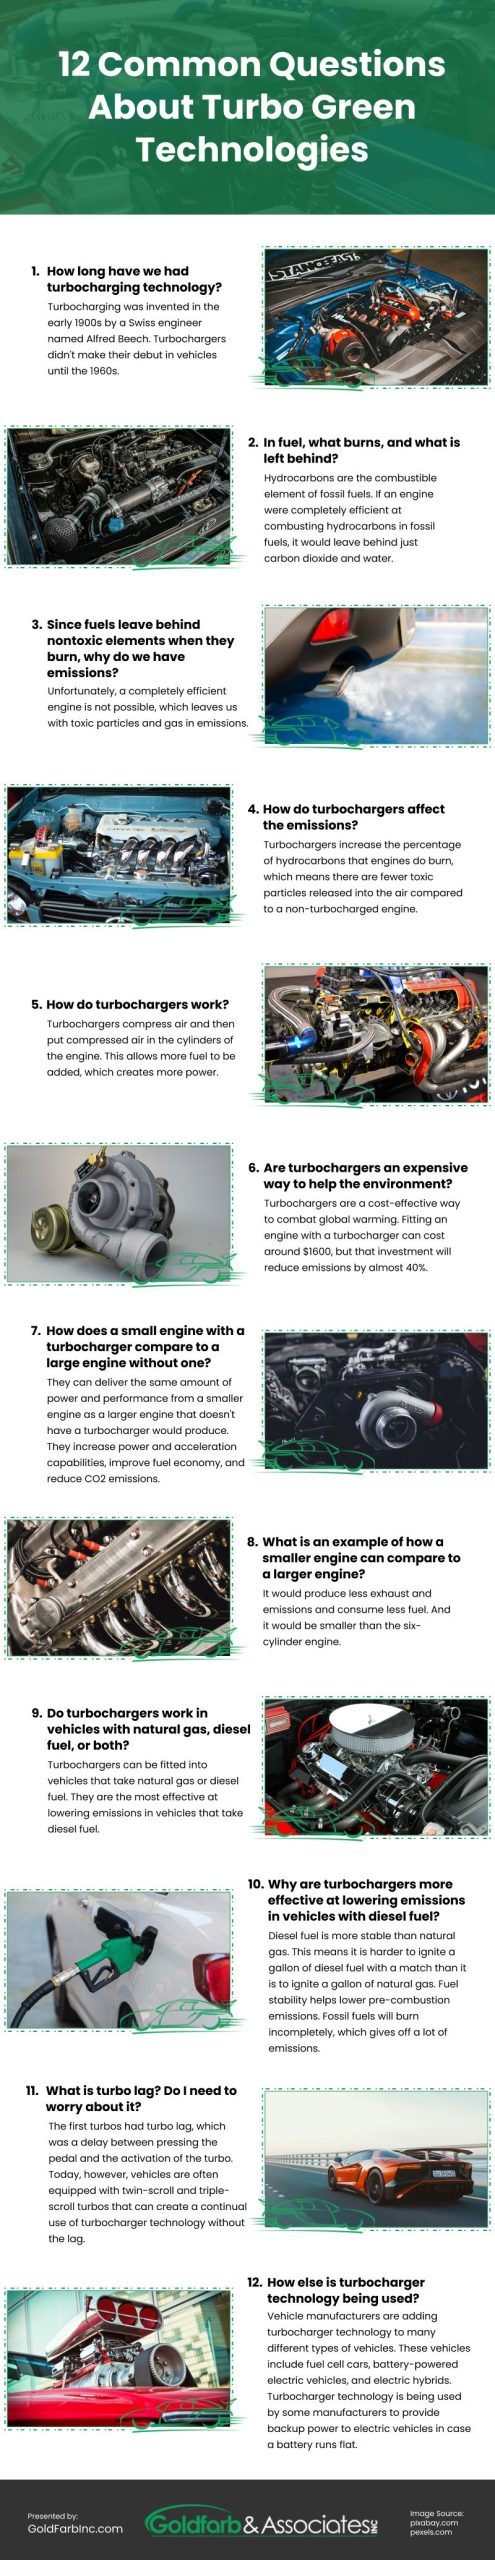 12 Common Questions About Turbo Green Technologies Infographic